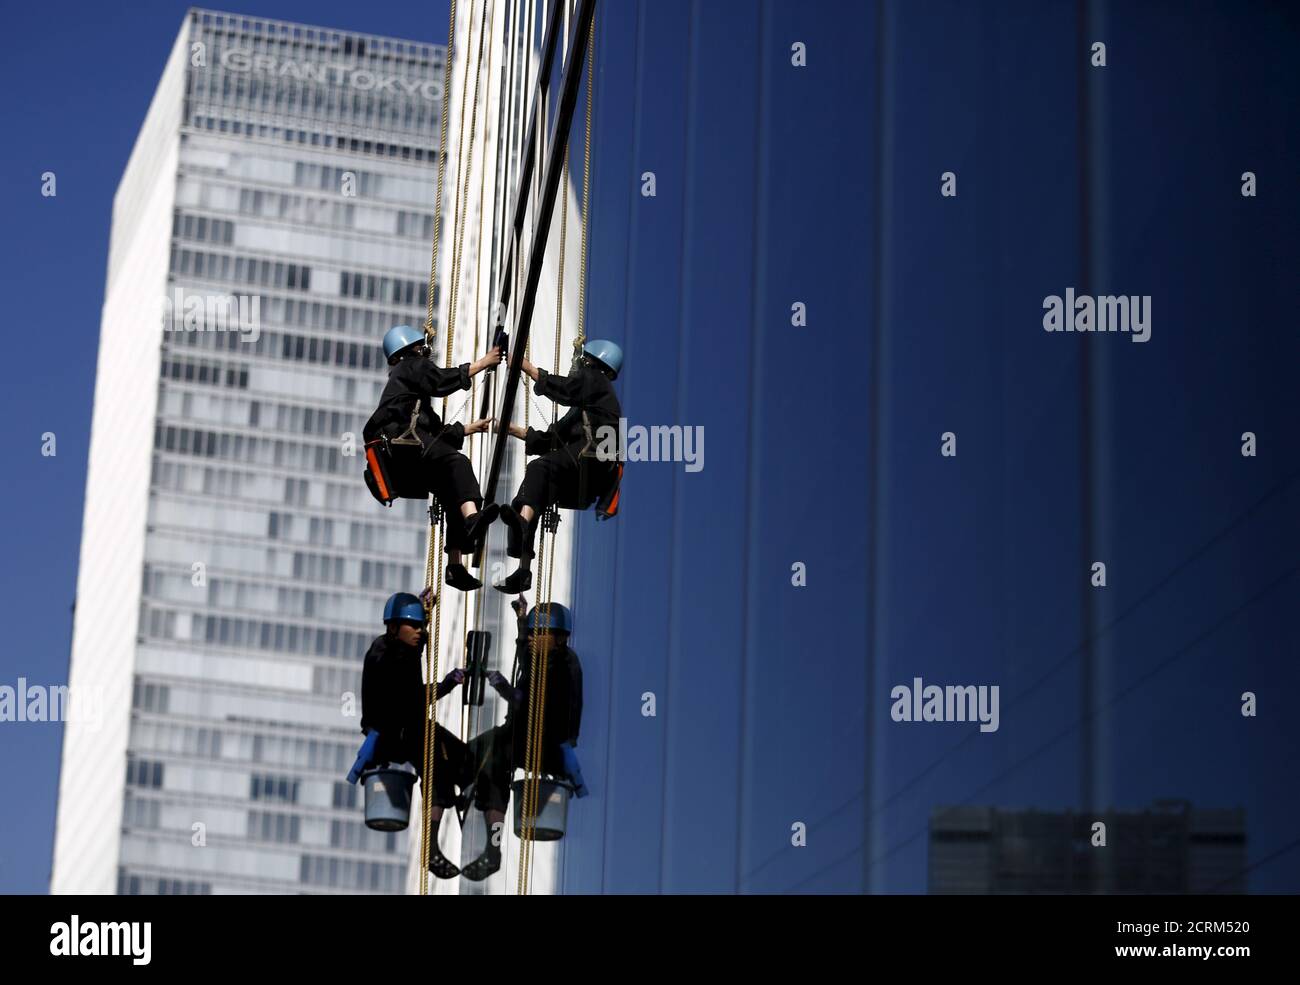 Workers clean windows at an office building in a business district in Tokyo, Japan, February 16, 2016. The Bank of Japan's negative interest rates came into effect on Tuesday in a radical plan already deemed a failure by financial markets, highlighting Tokyo's lack of options to spur growth as global markets sputter.  REUTERS/Thomas Peter Stock Photo